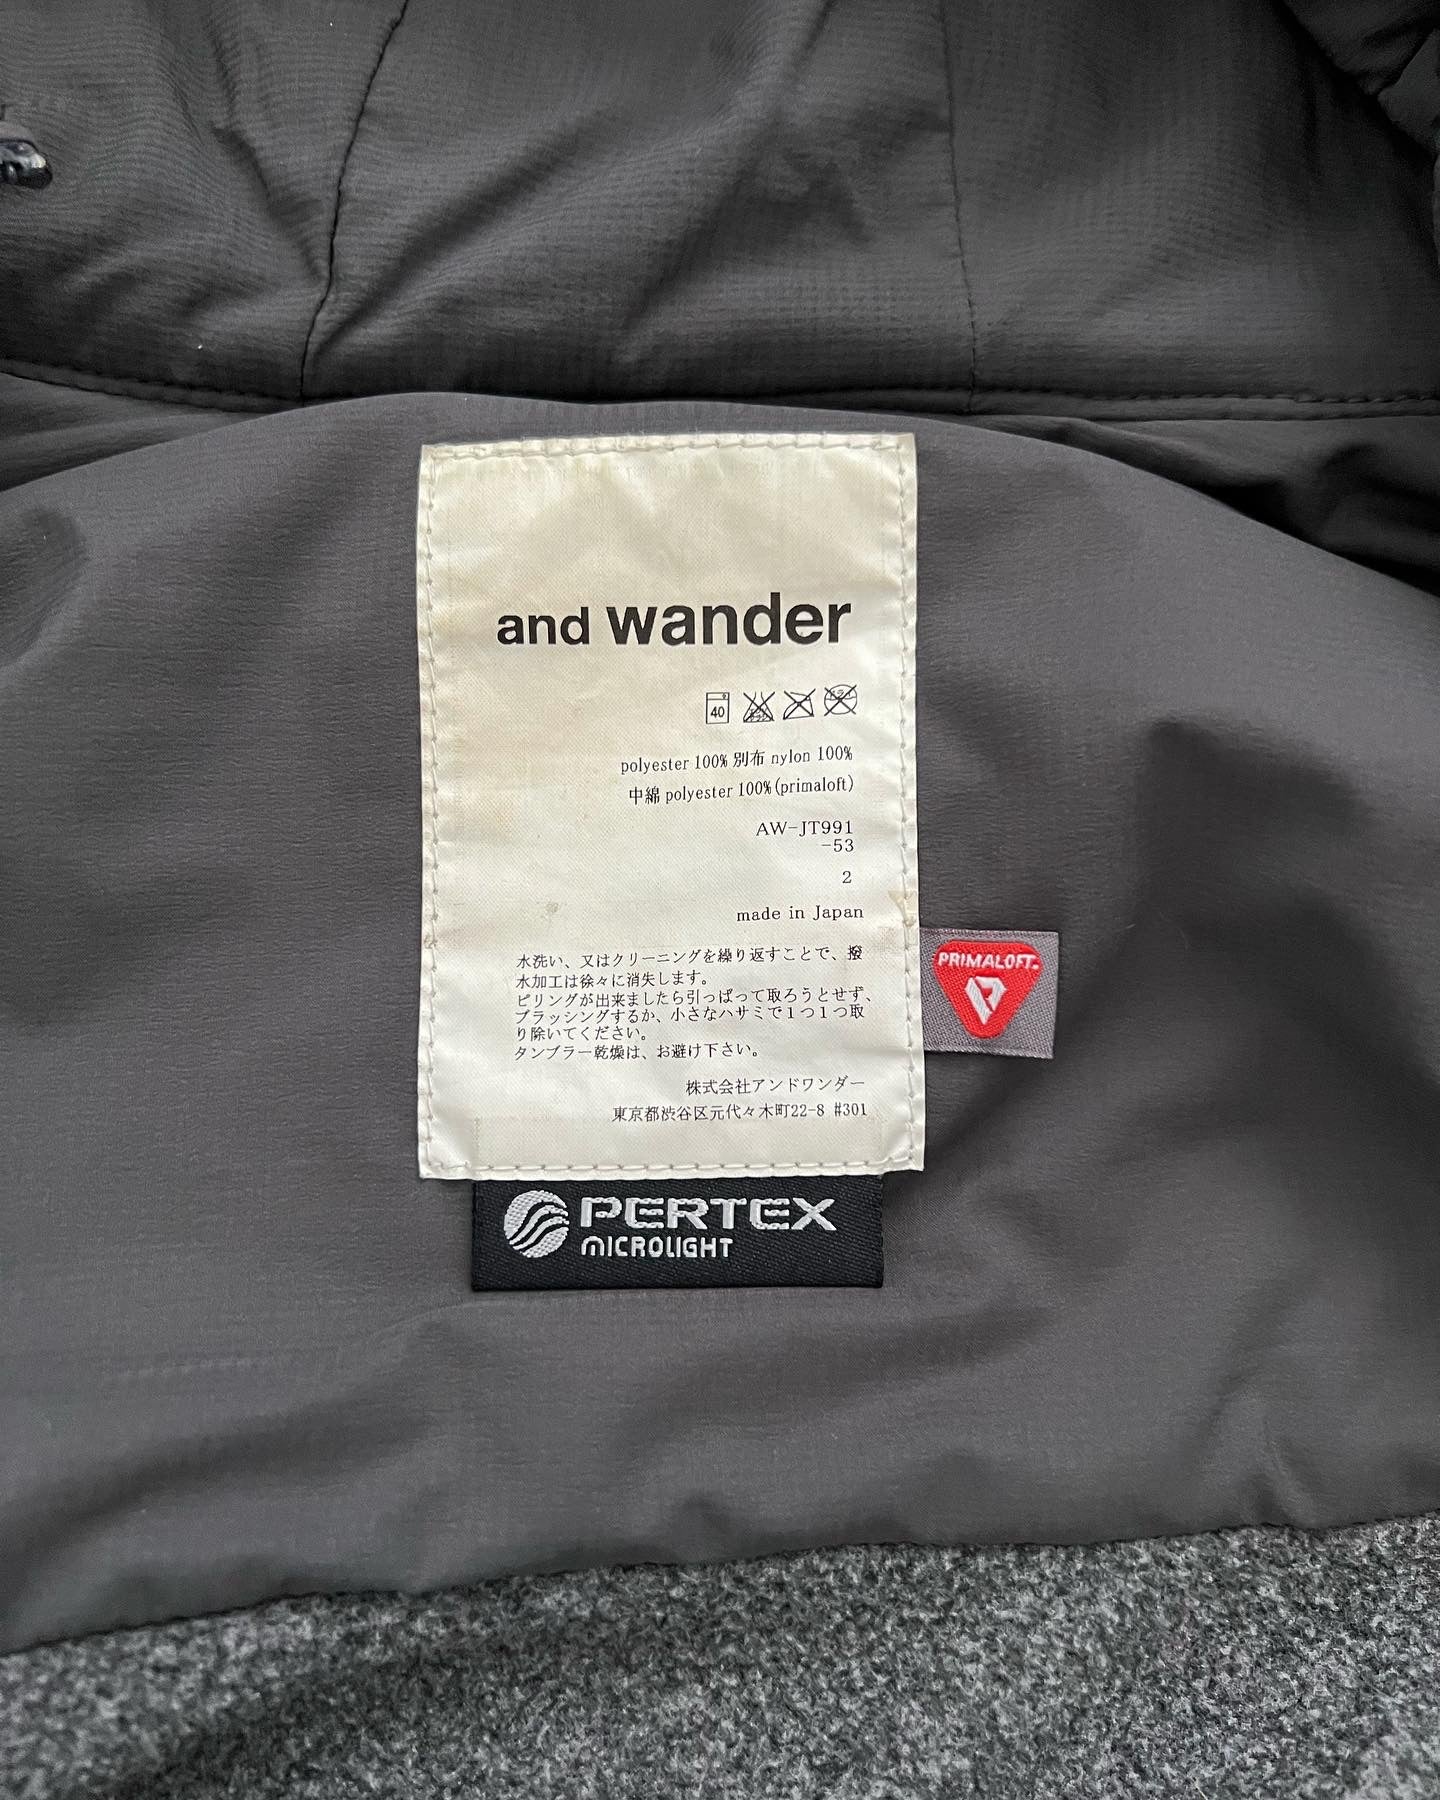 And Wander Pertex Microlight Hybrid Insulated Jacket - Size S